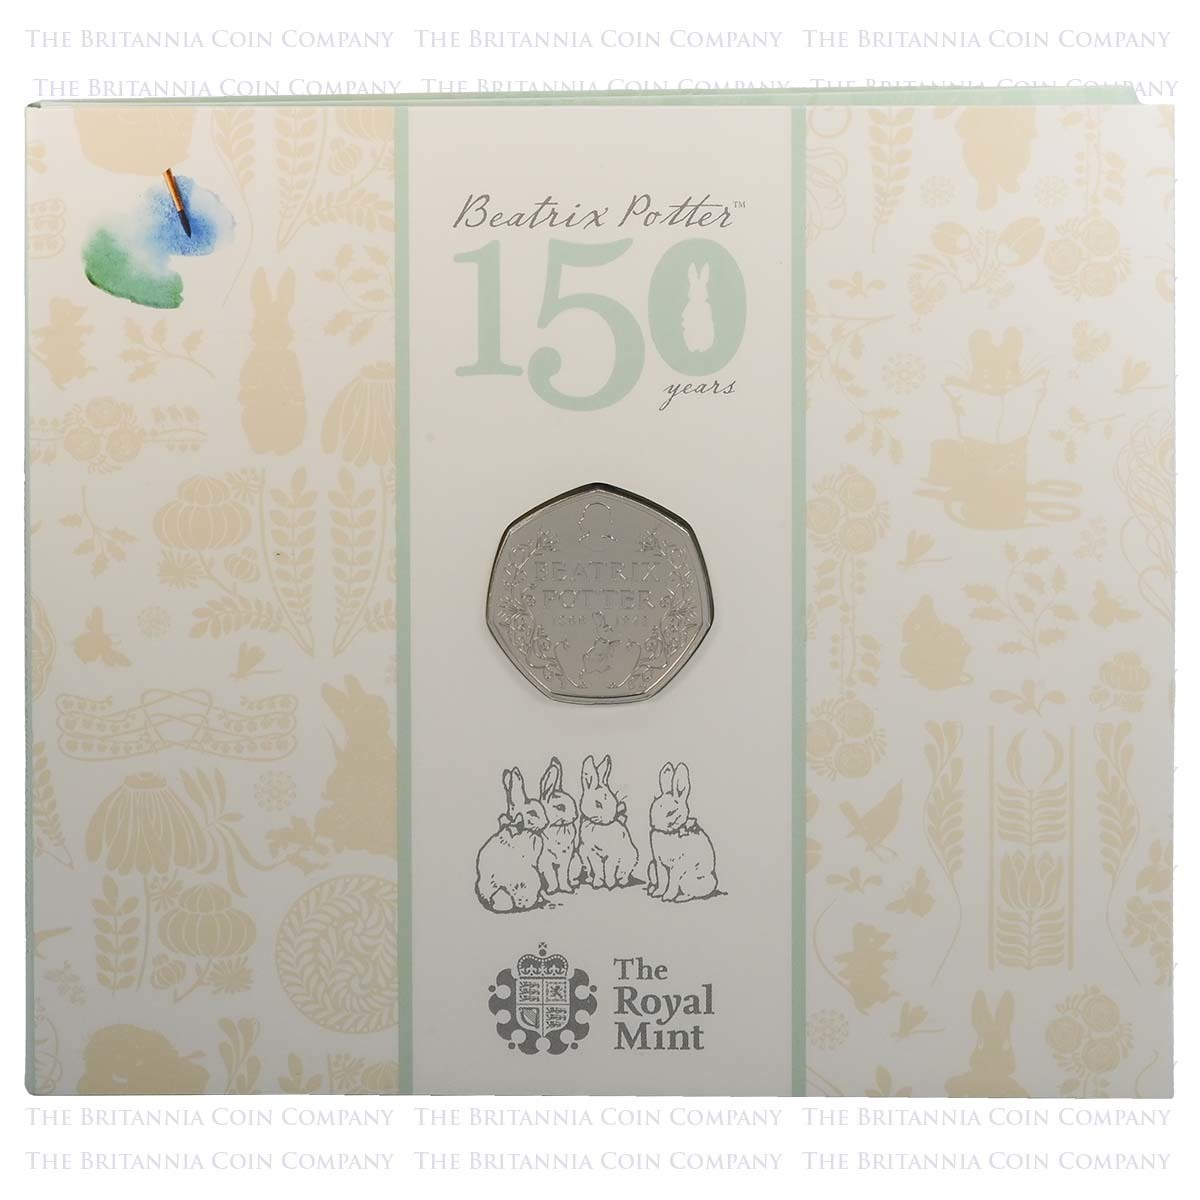 UK16BPBU 2016 Beatrix Potter 150th Anniversary Fifty Pence Brilliant Uncirculated Coin In Folder